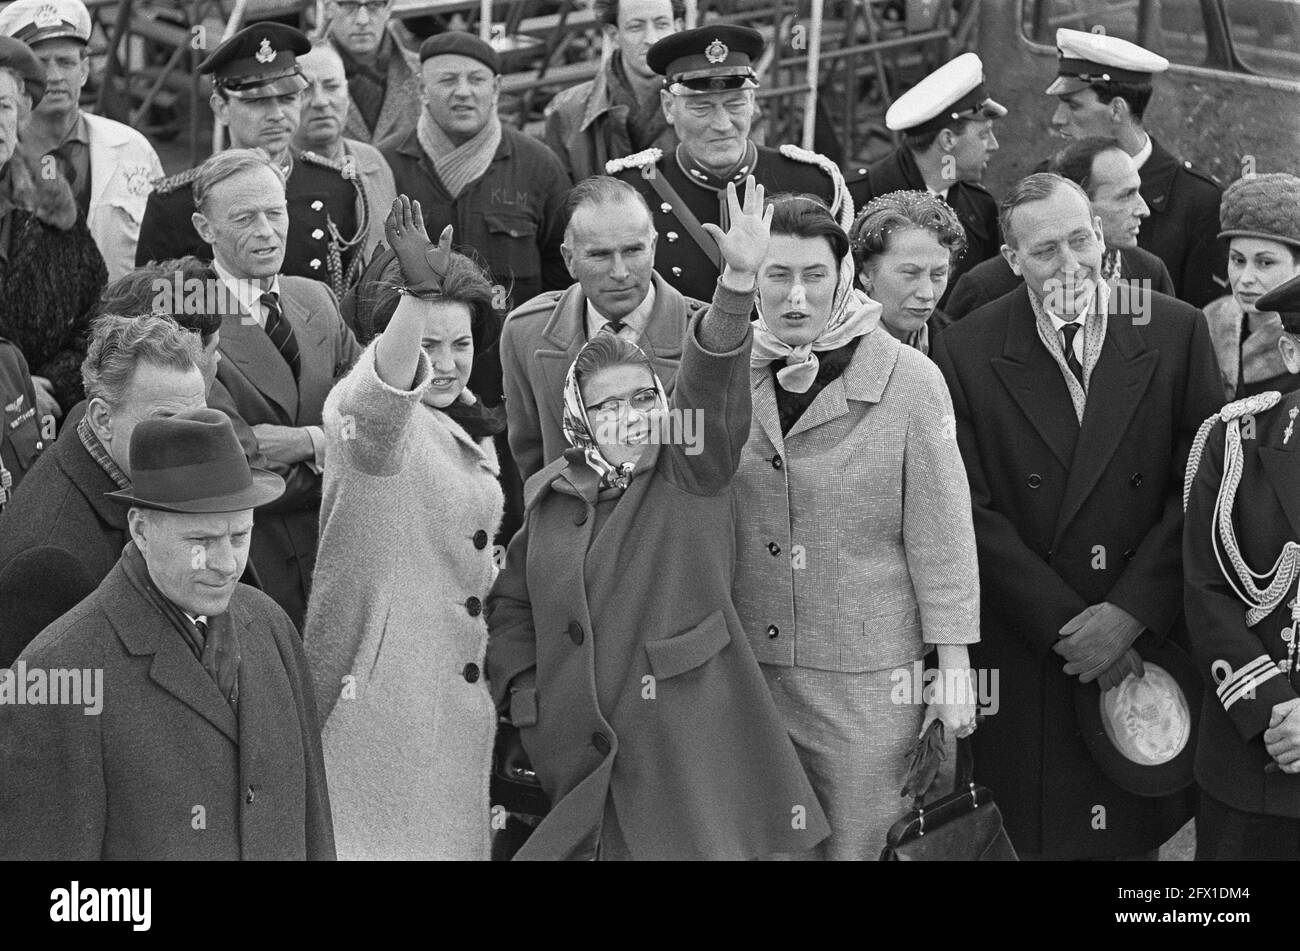 Royal couple and Princess Beatrix to Mexico departed from Schiphol Airport, Princess Margriet and Princess Christina while waving goodbye [next to them with headscarf] court lady Martine van Loon-Labouchere. Erik Hazelhoff Roelfzema is standing behind them. Behind Princess Christina, Freek Bischoff van Heemskerck, chief steward of the queen, 7 April 1964, The Netherlands, 20th century press agency photo, news to remember, documentary, historic photography 1945-1990, visual stories, human history of the Twentieth Century, capturing moments in time Stock Photo